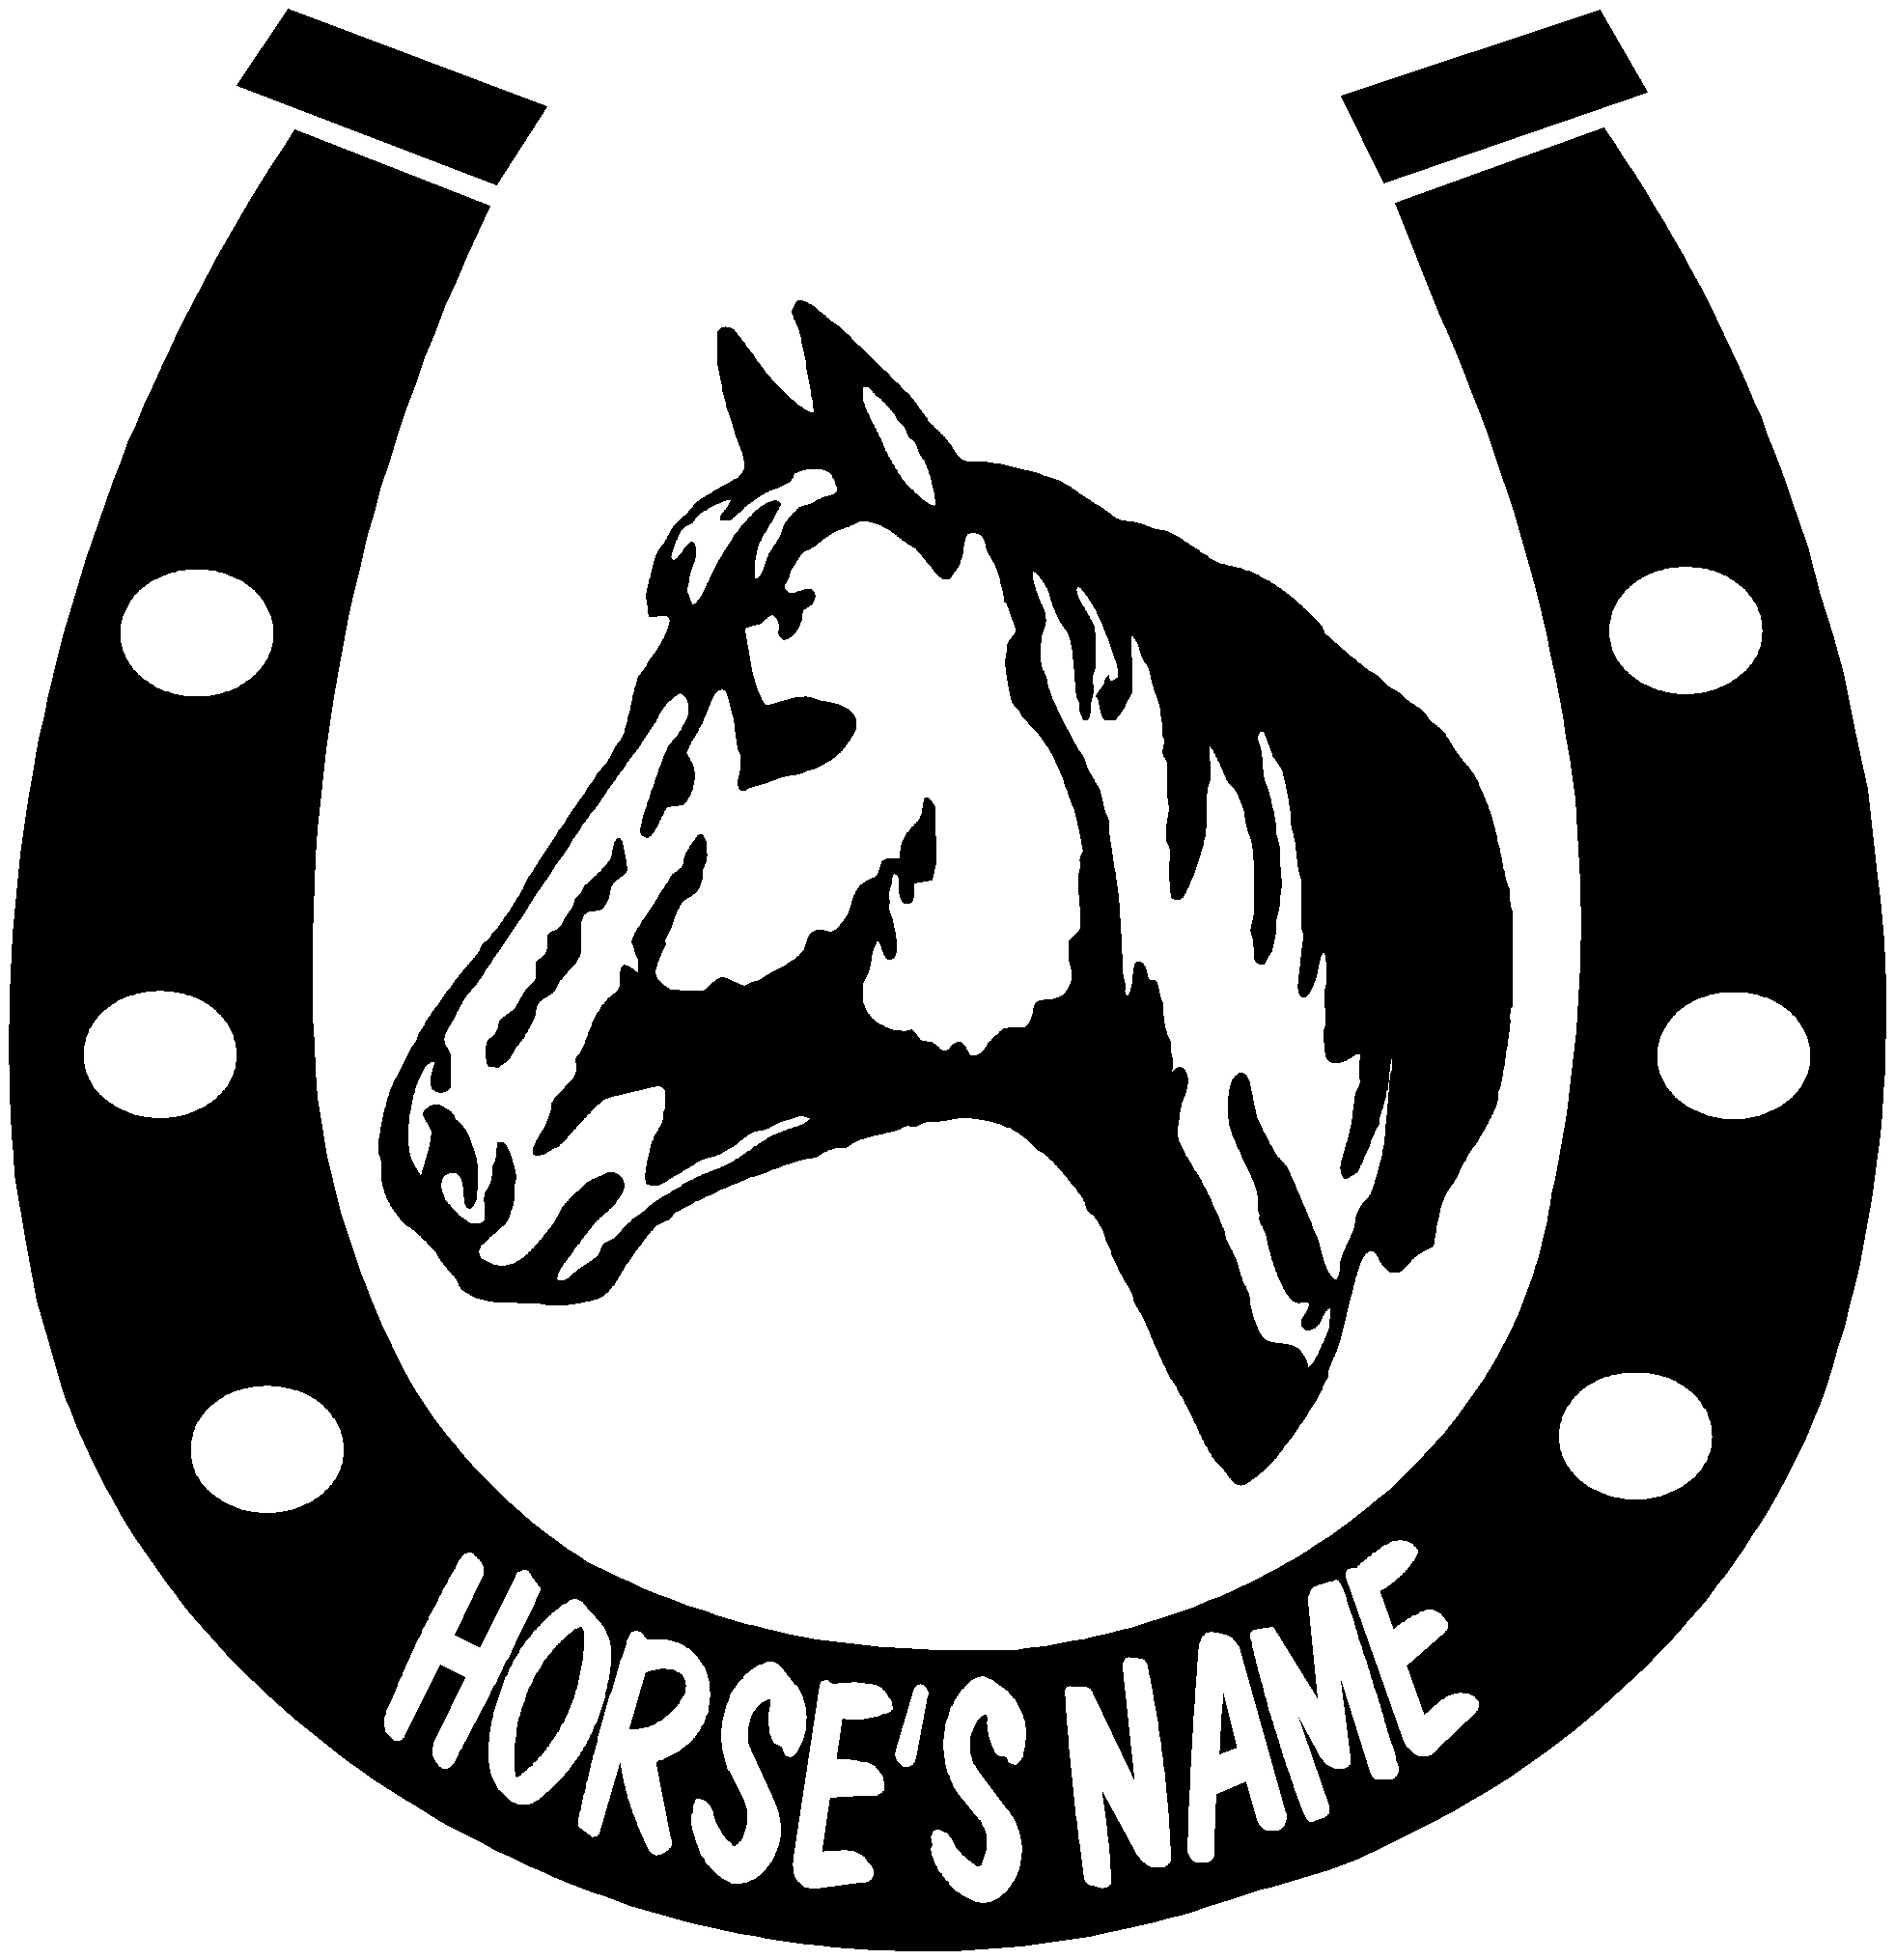 Horseshoe Drawing - ClipArt Best